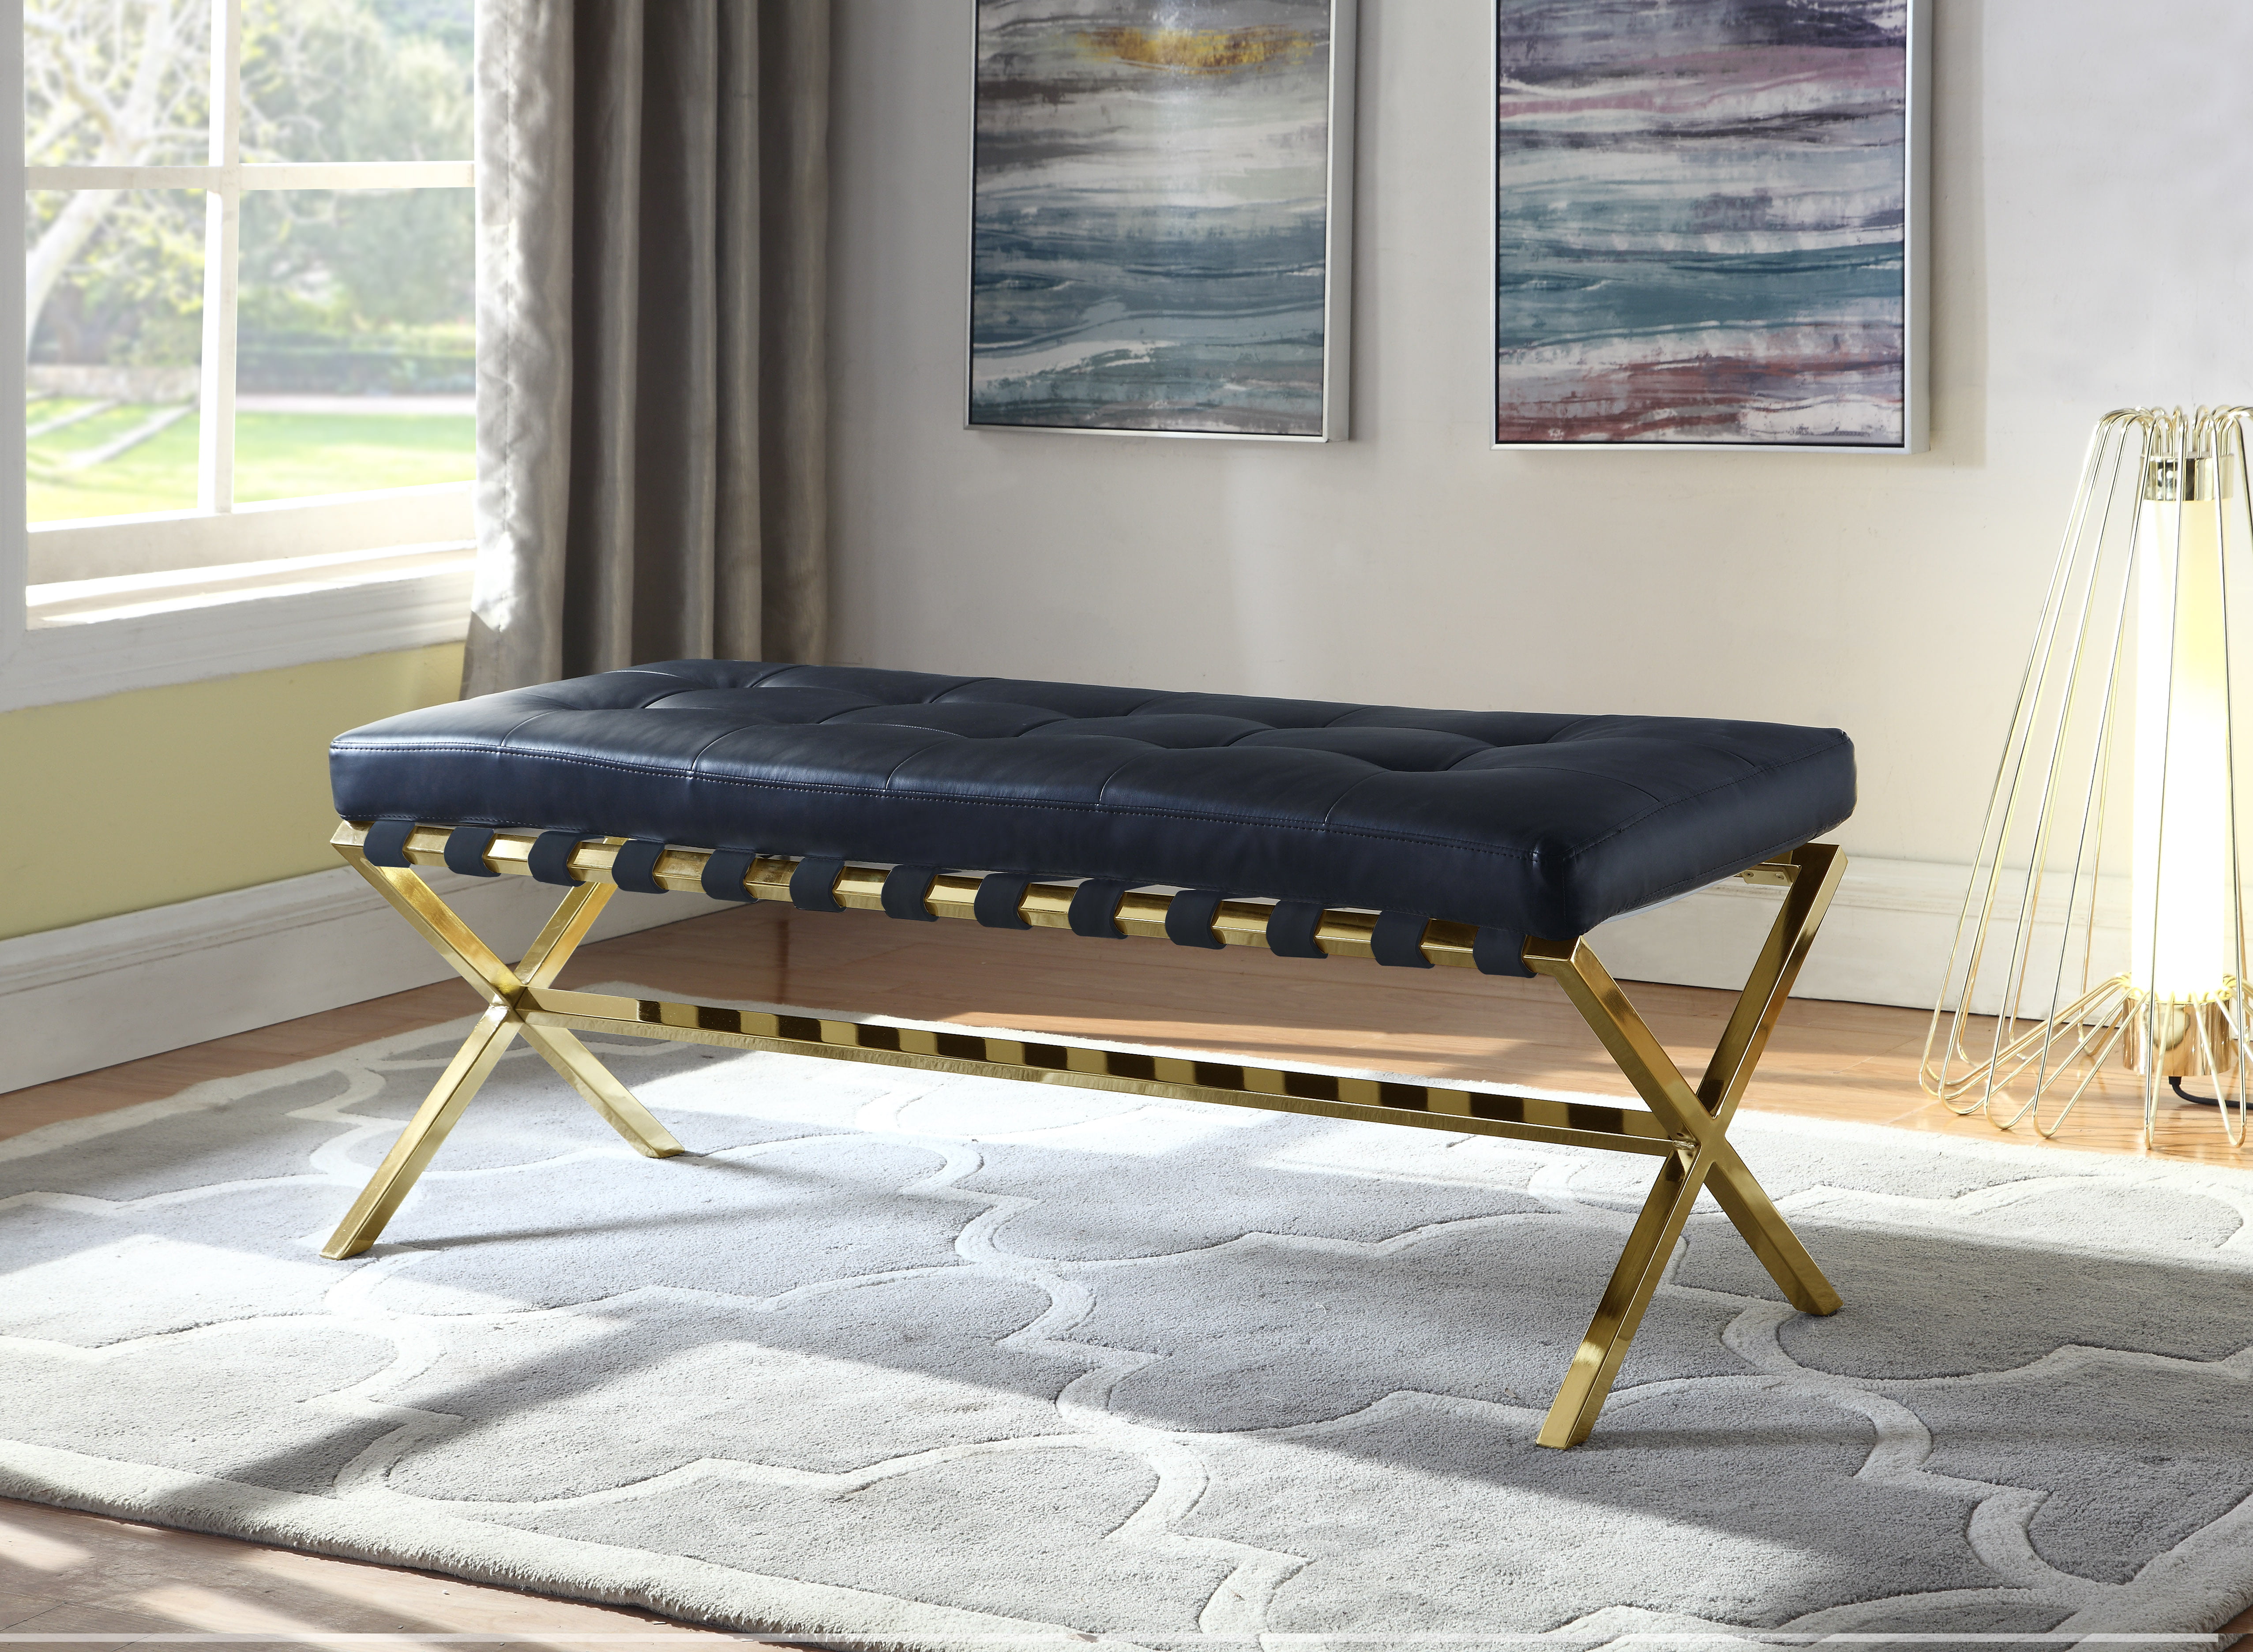 Fbh2631 Chic Home Perez Pu Leather Modern Contemporary Tufted Seating Goldtone Metal Leg Bench - Black